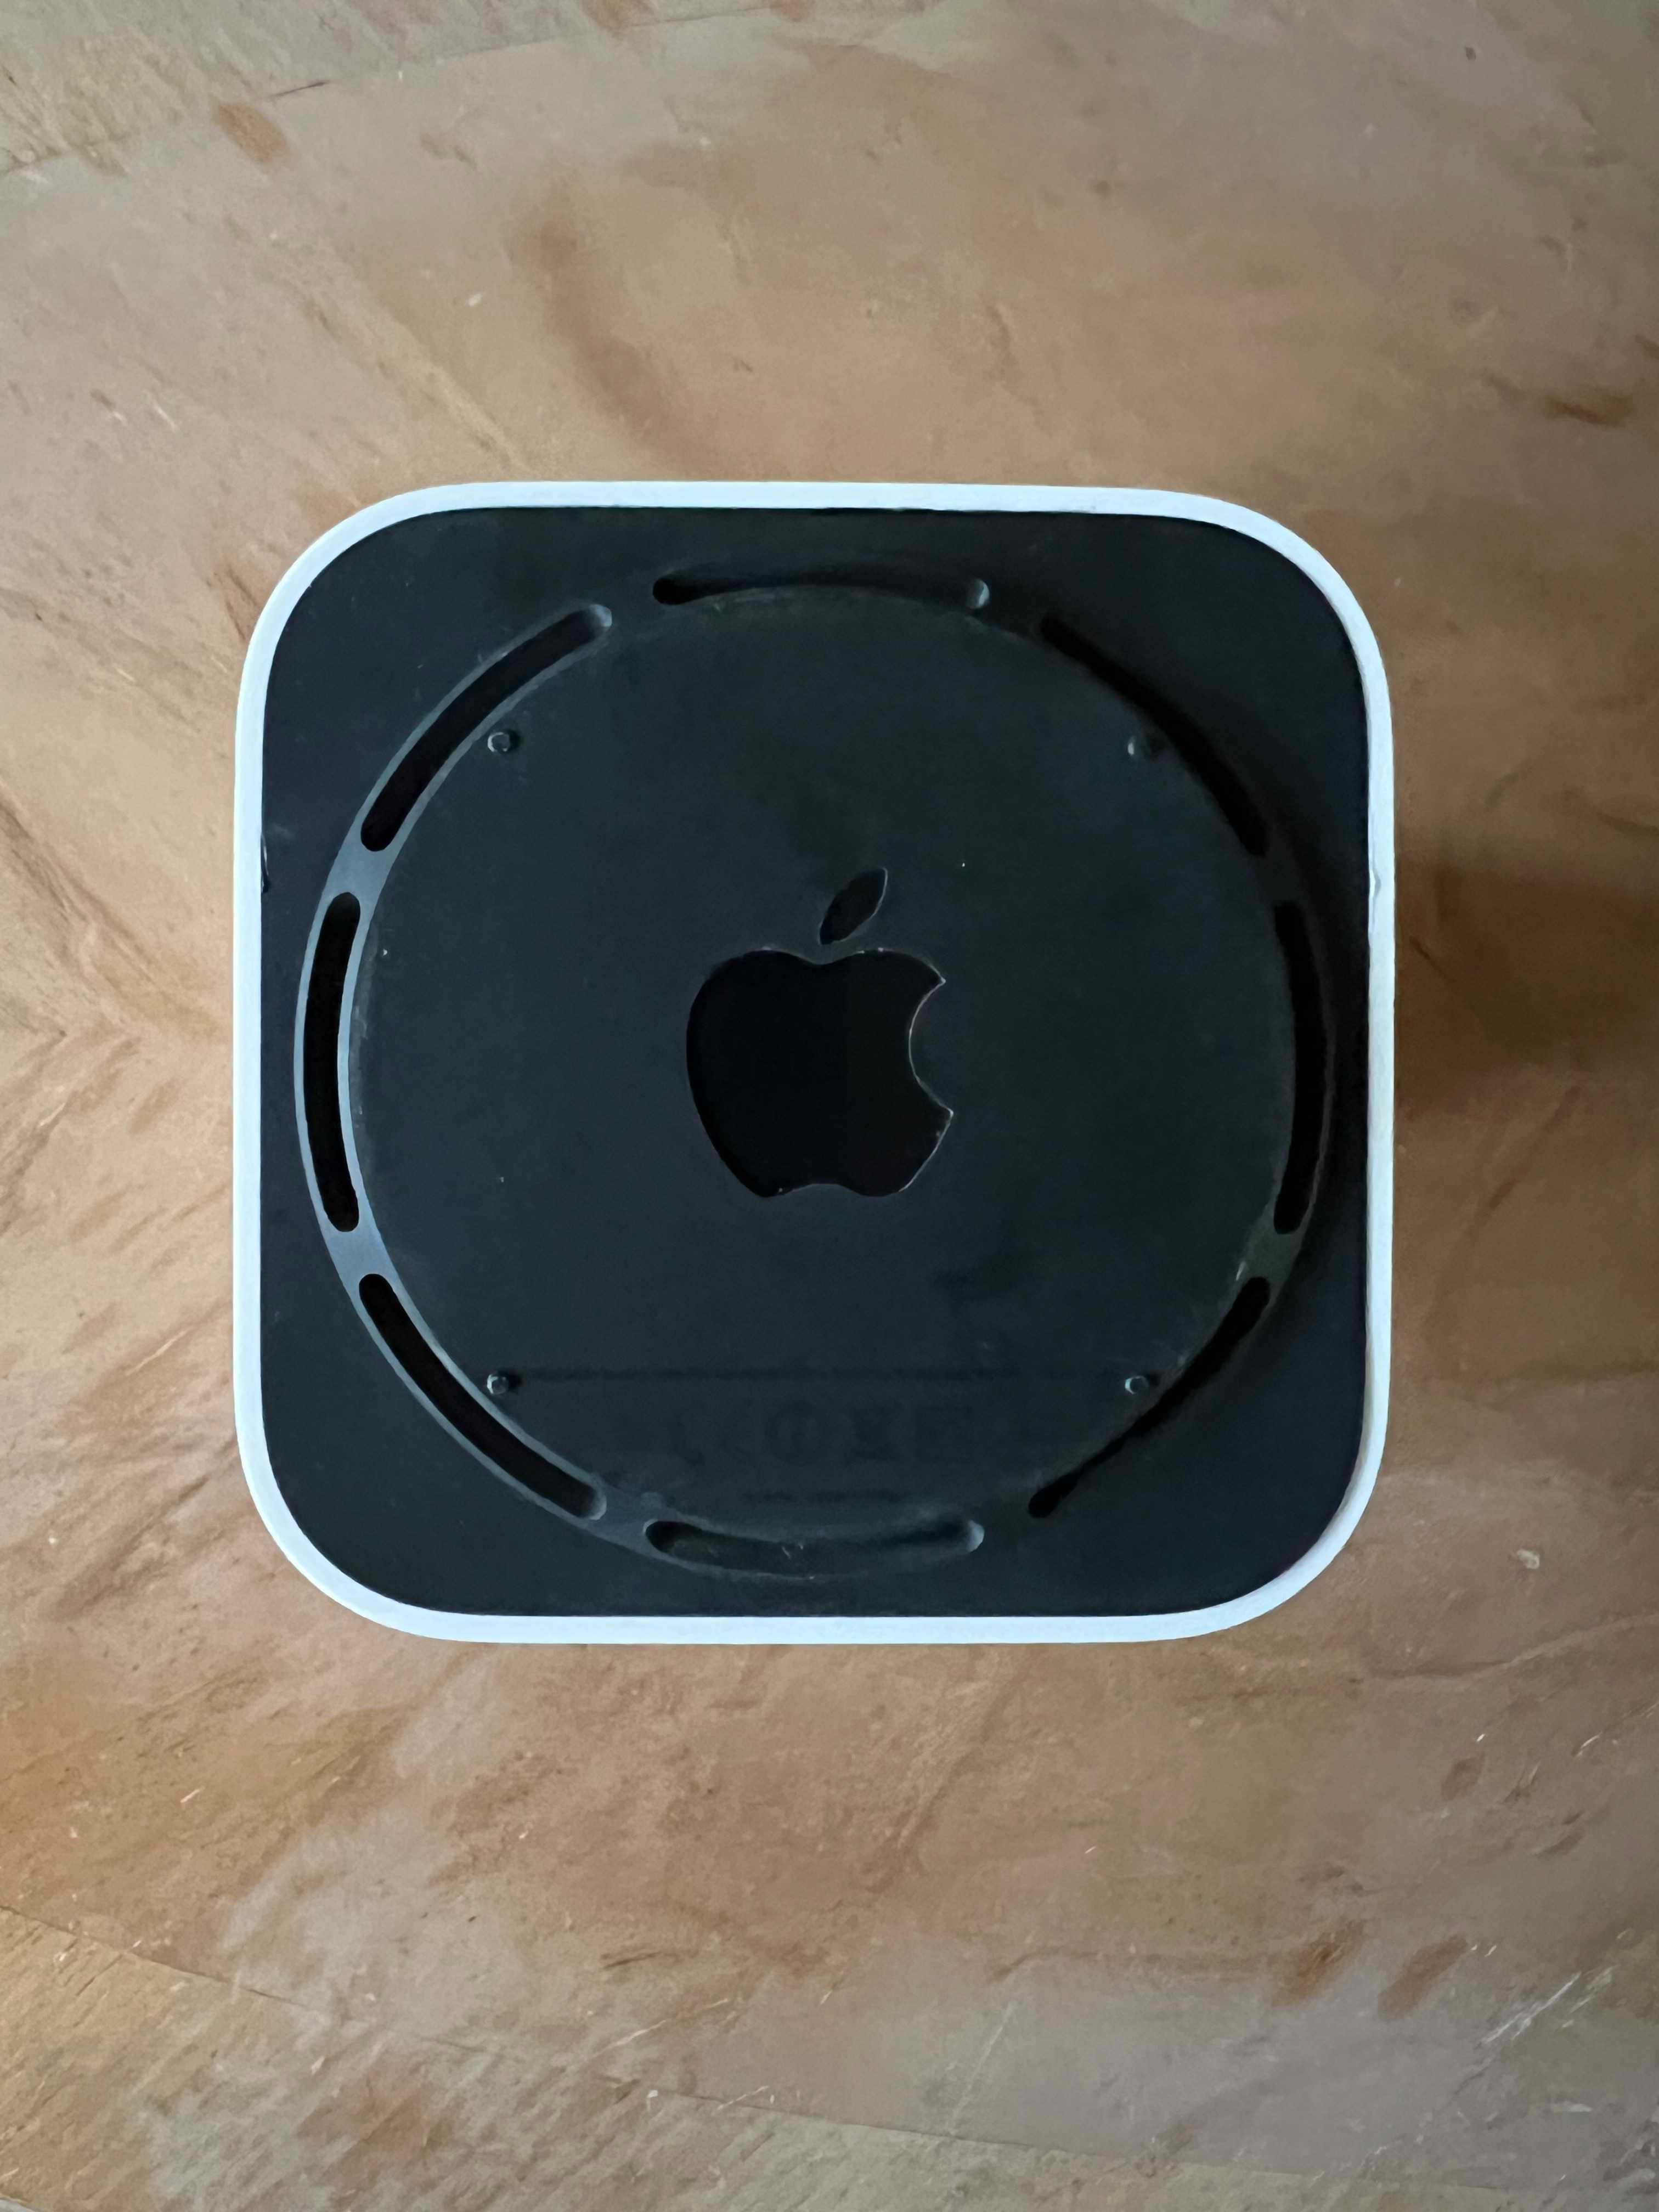 Apple AirPort Time Capsule 2TB Router